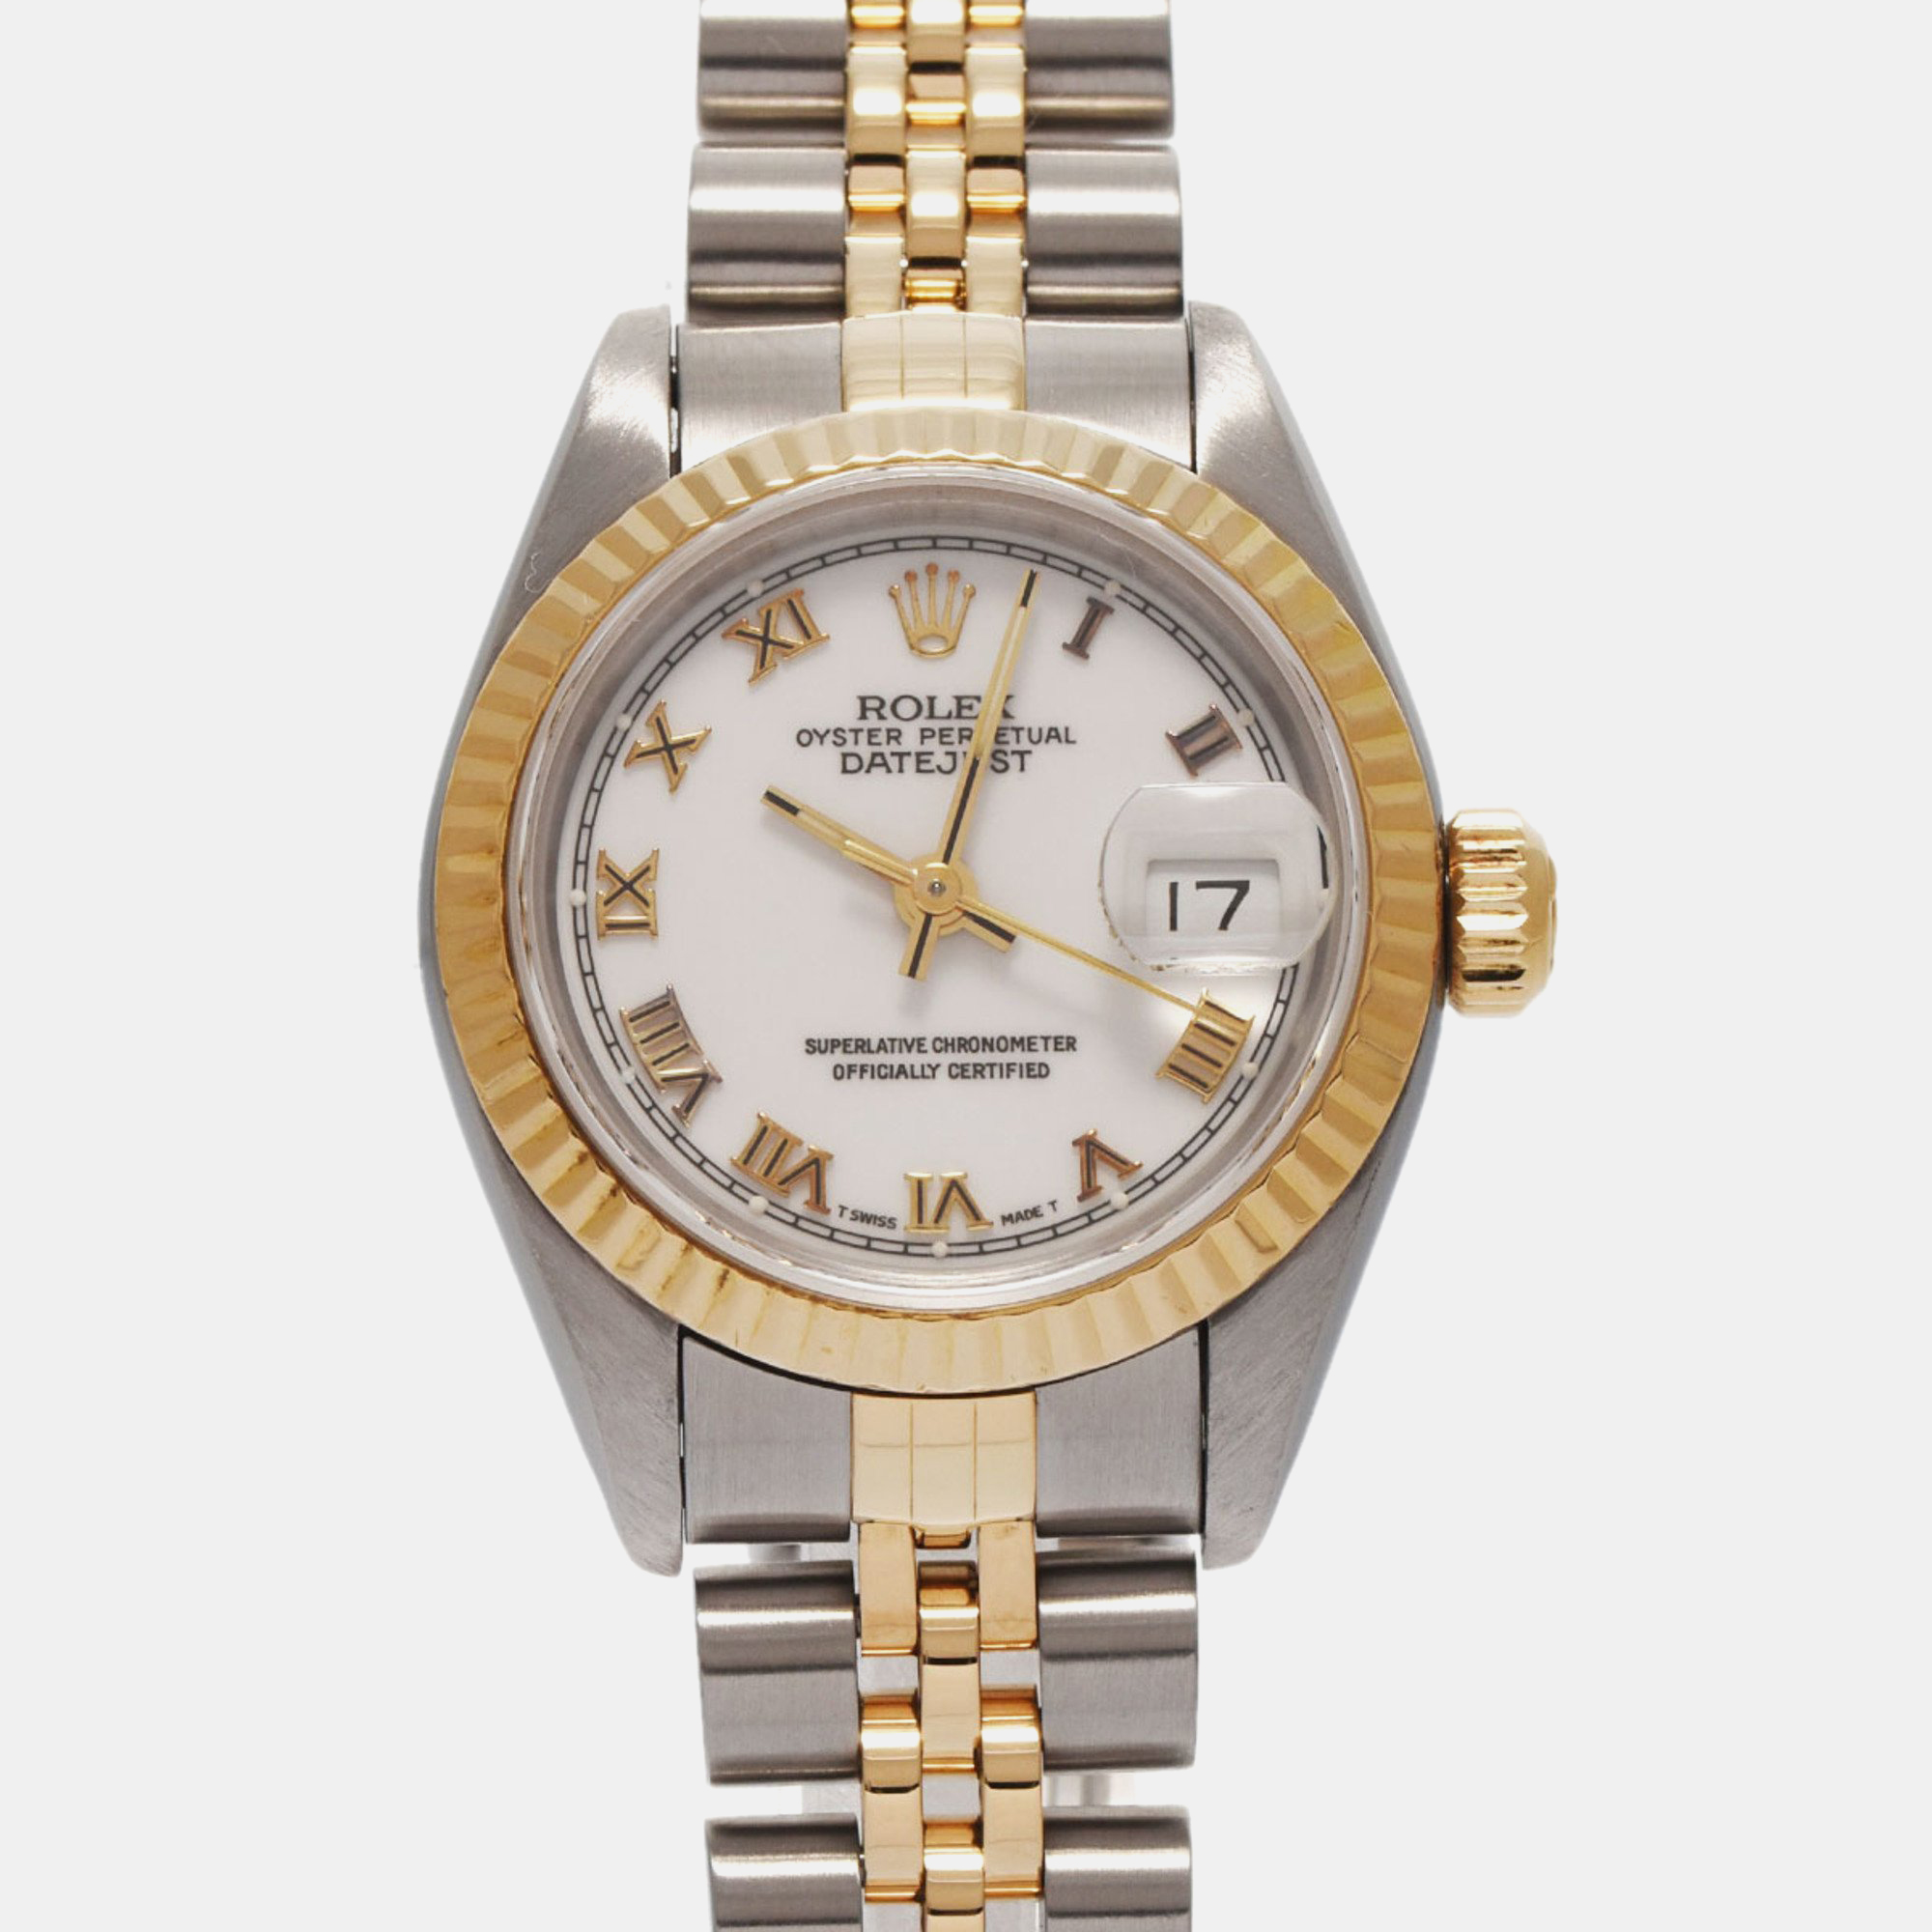 

Rolex White 18k Yellow Gold Stainless Steel Datejust 69173 Automatic Women's Wristwatch 26 mm